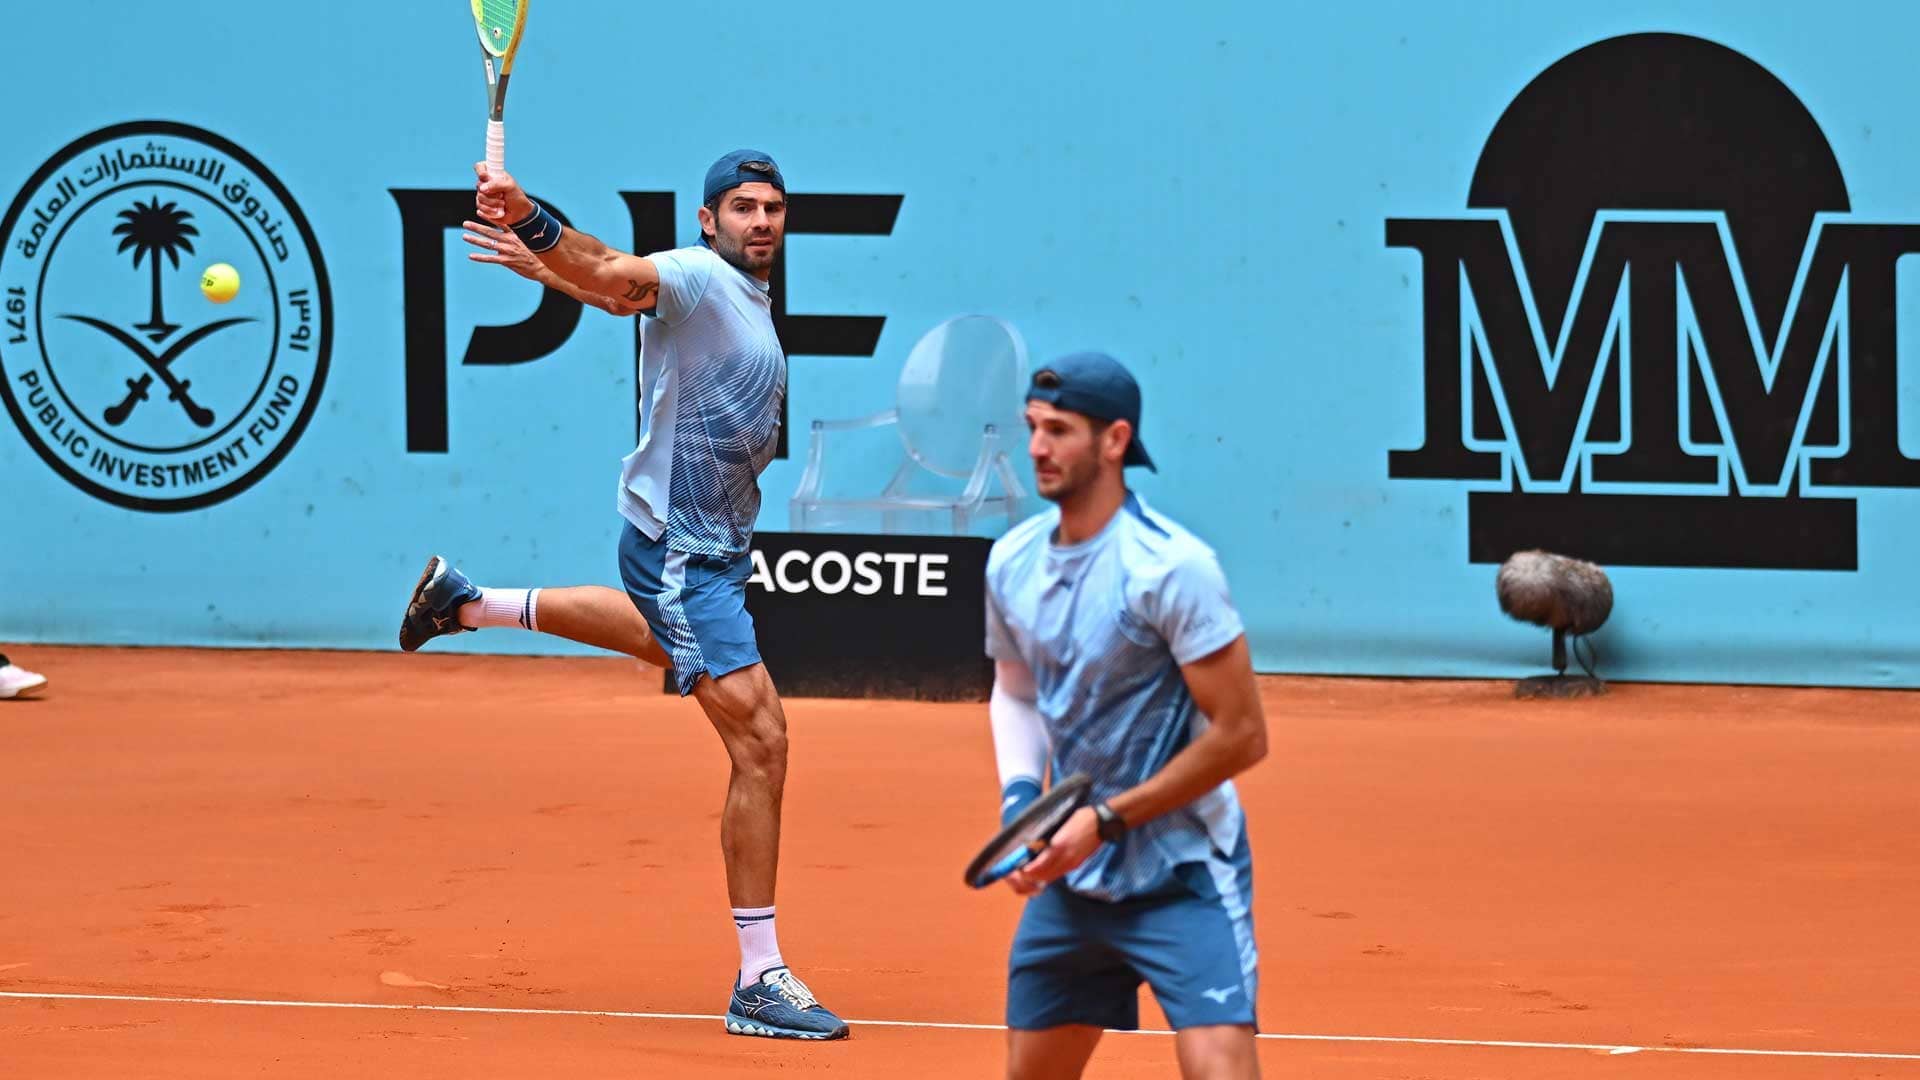 On Day 1 of Madrid doubles trial, honours split between singles & doubles stars